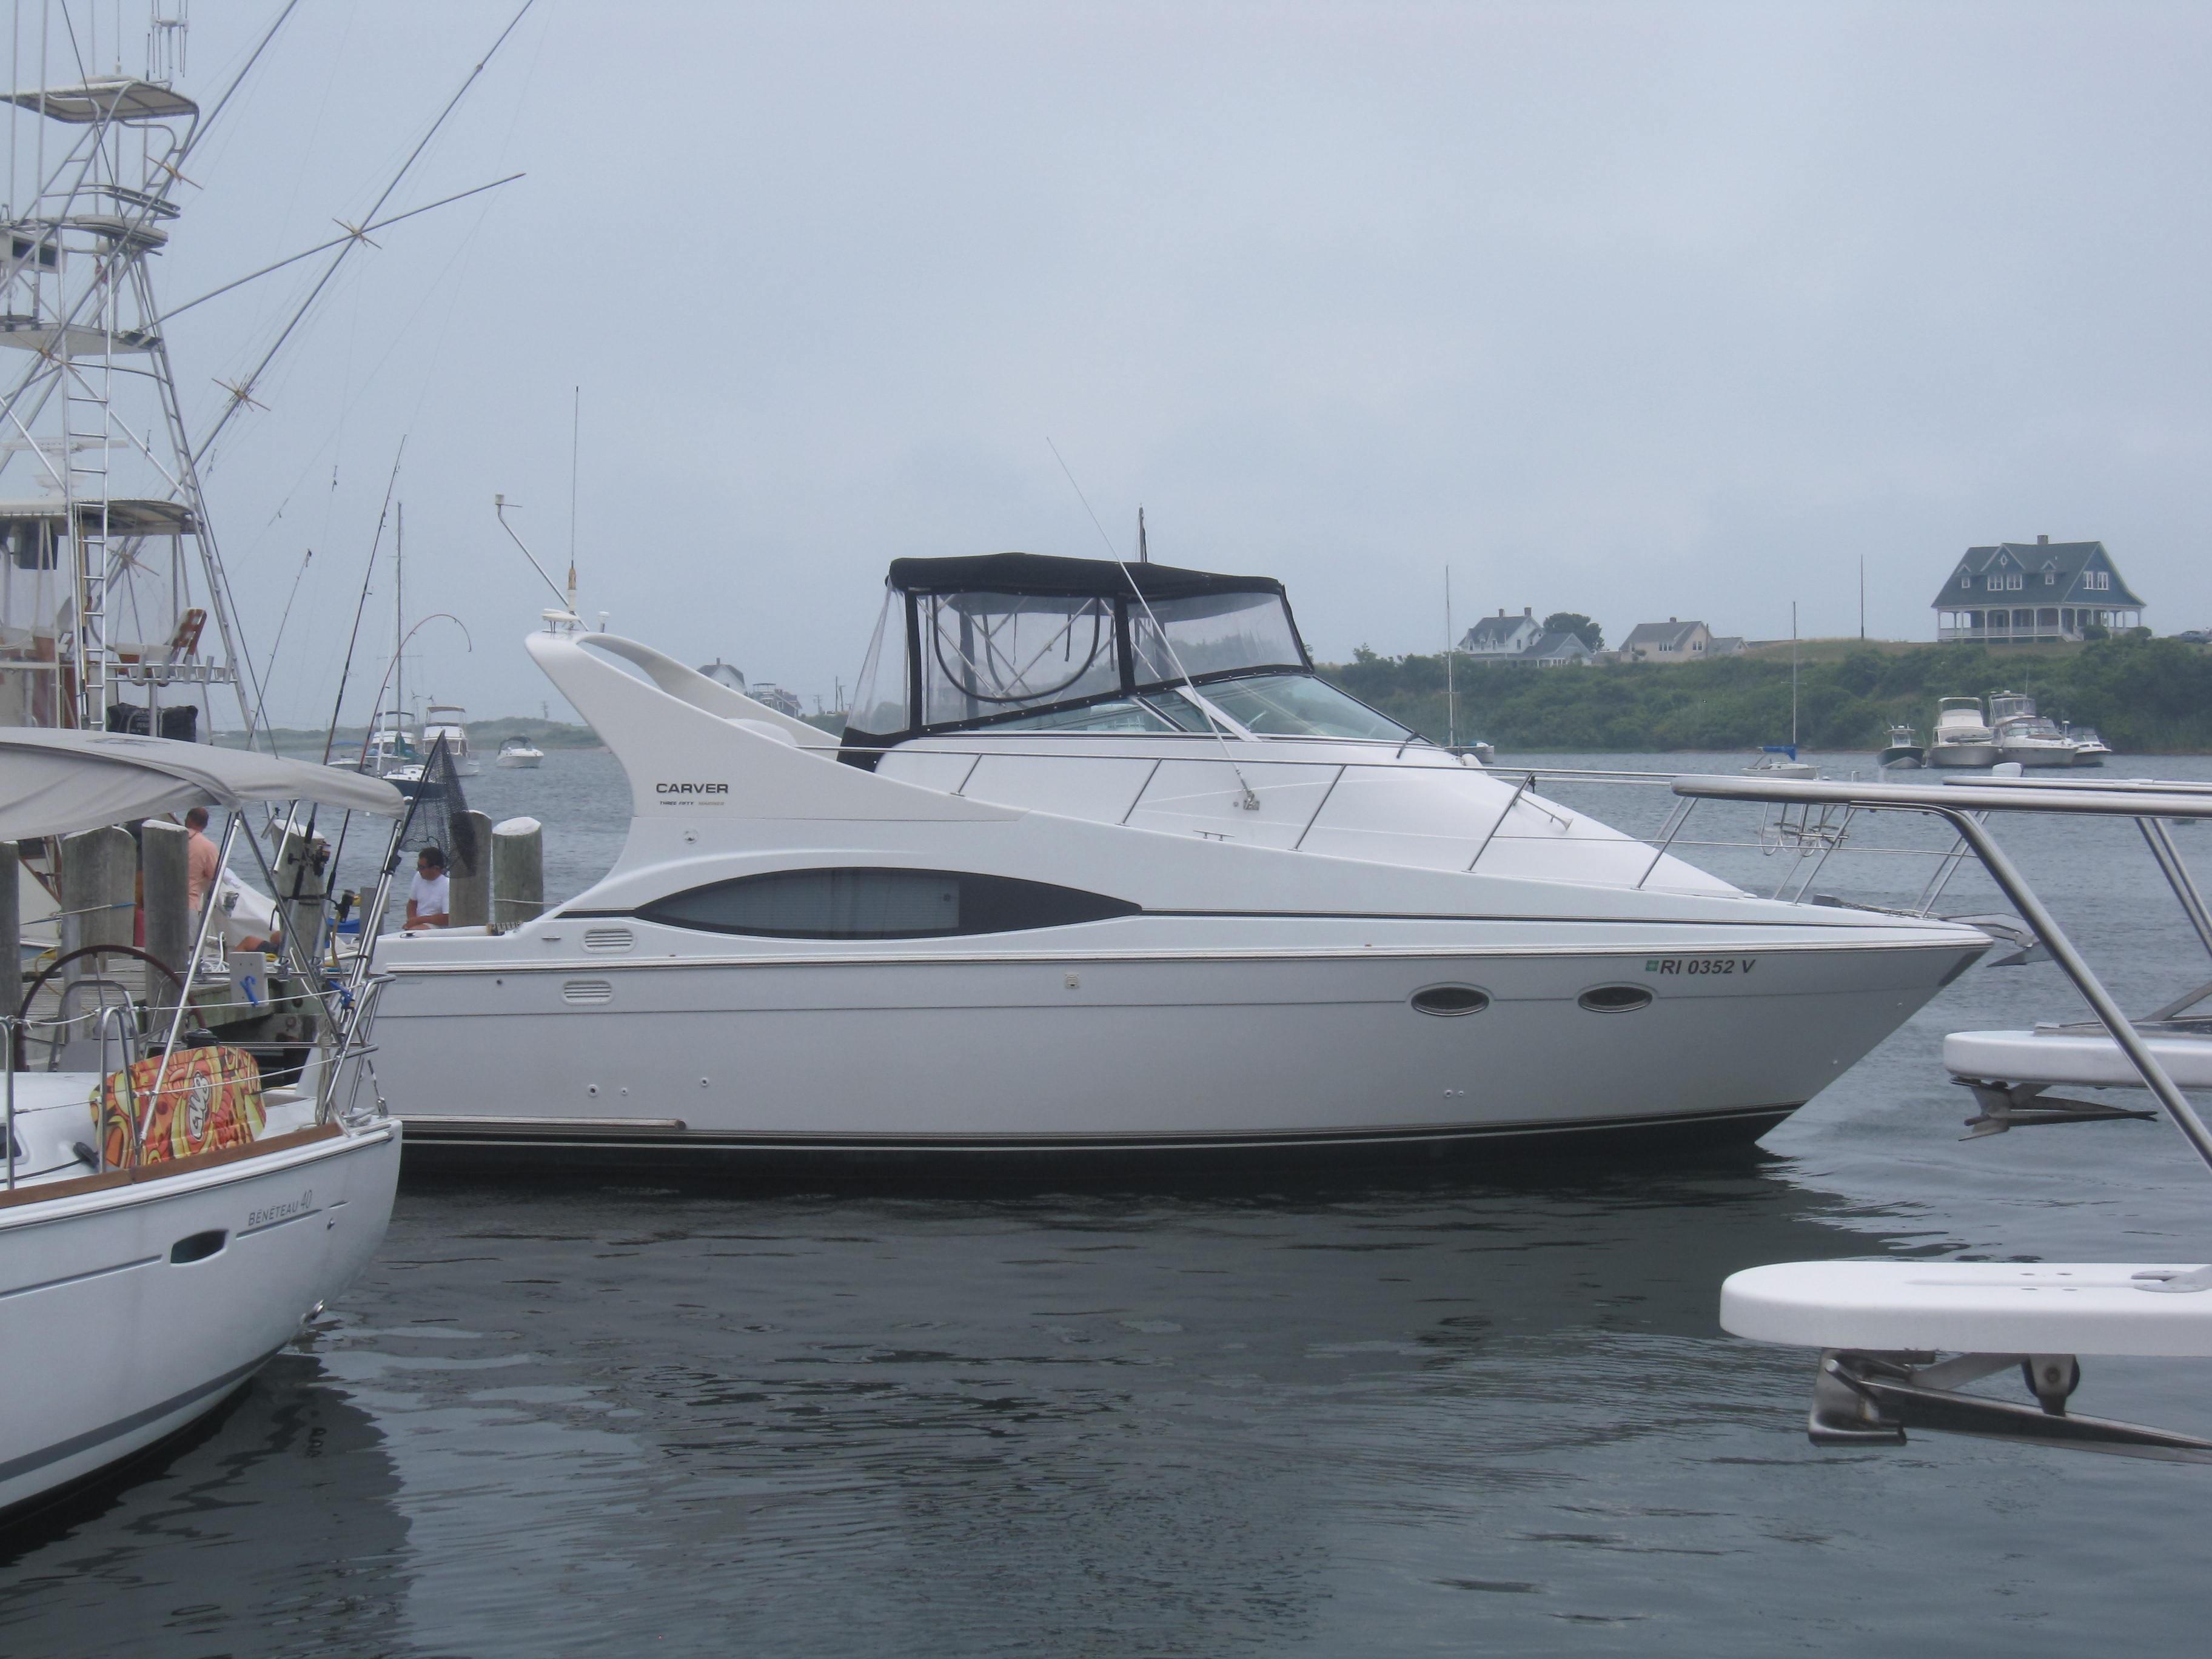 Carver riner 350, Scituate